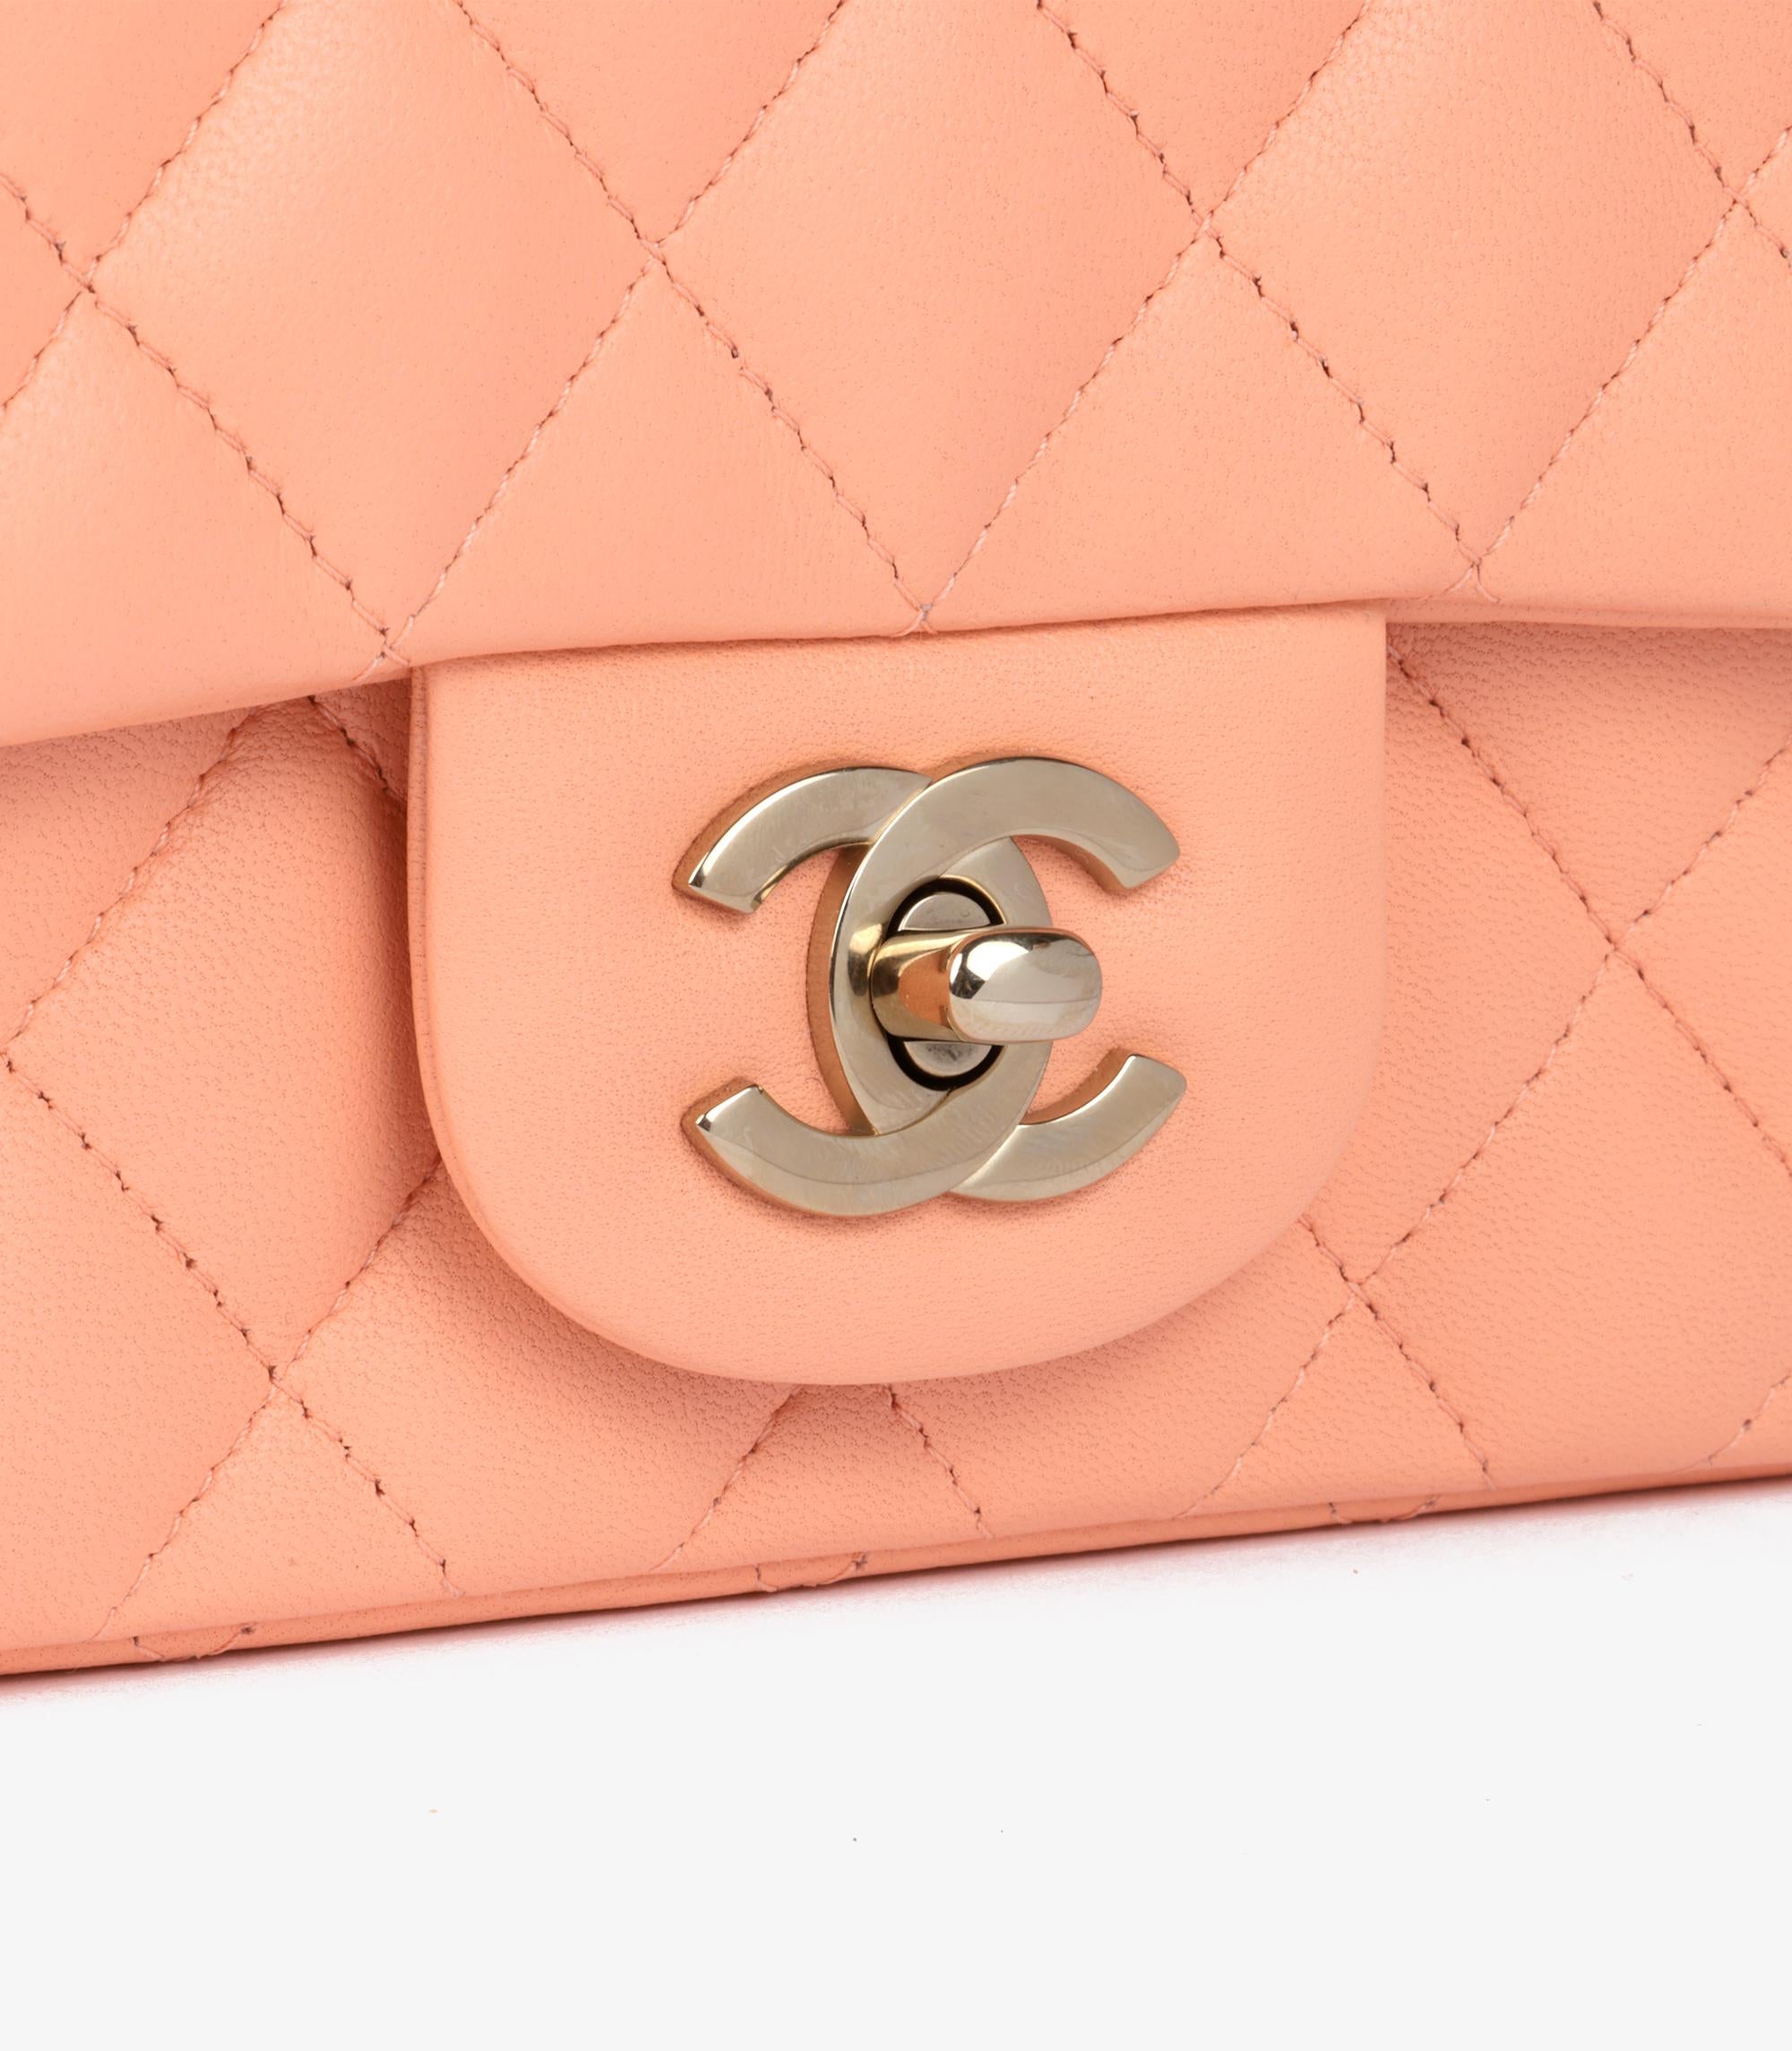 Chanel Salmon Peach Quilted Lambskin Square Mini Flap Bag In Excellent Condition For Sale In Bishop's Stortford, Hertfordshire